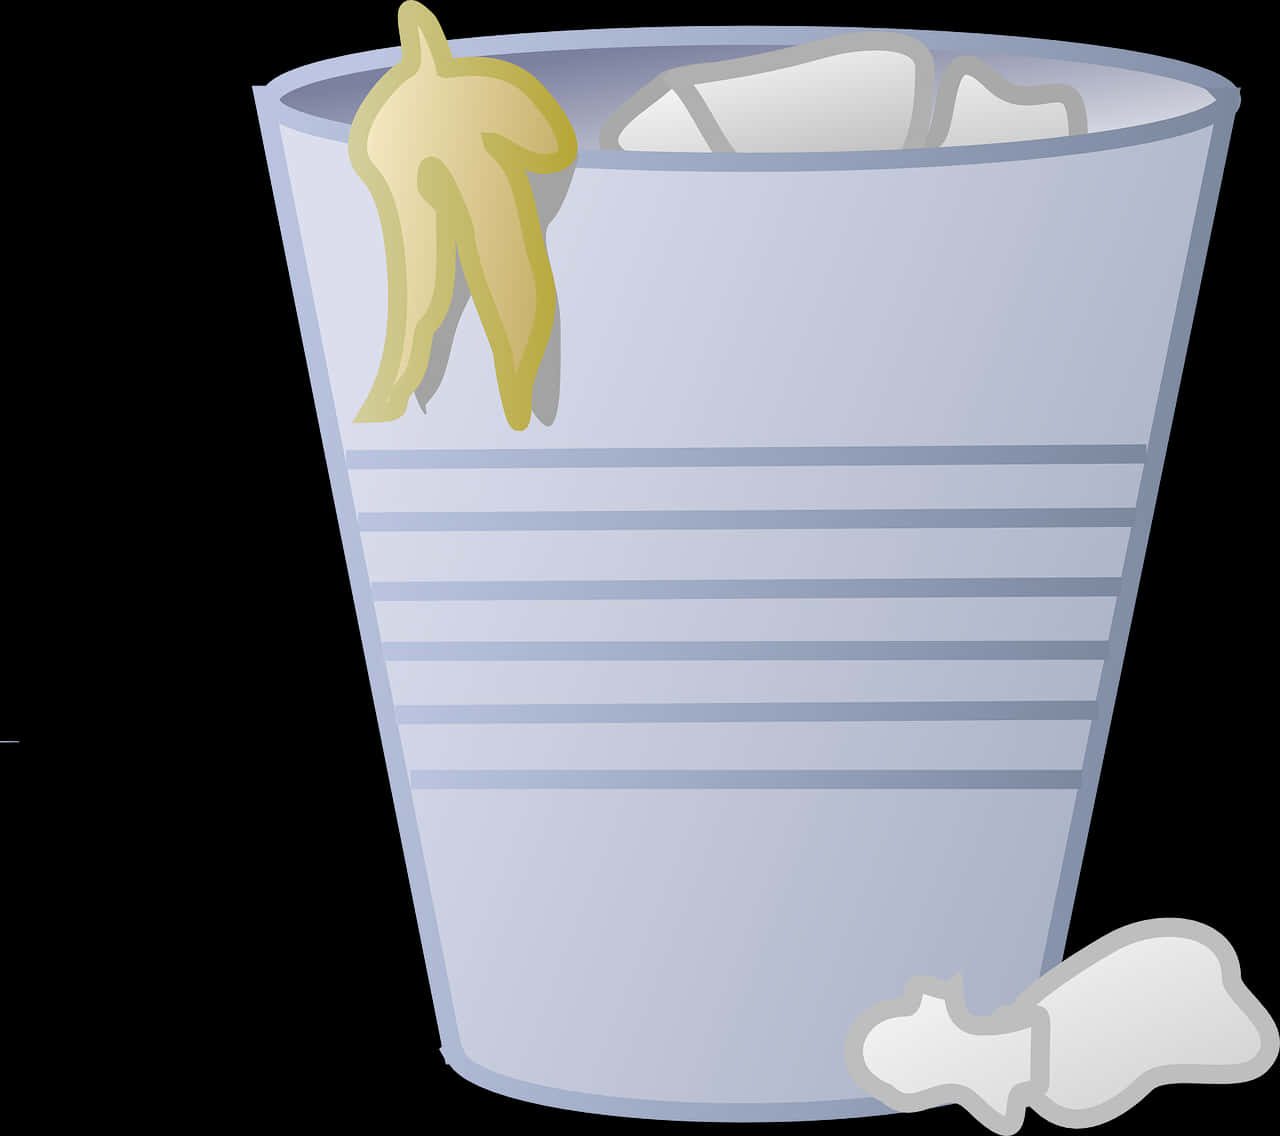 Overflowing Trash Can Illustration PNG